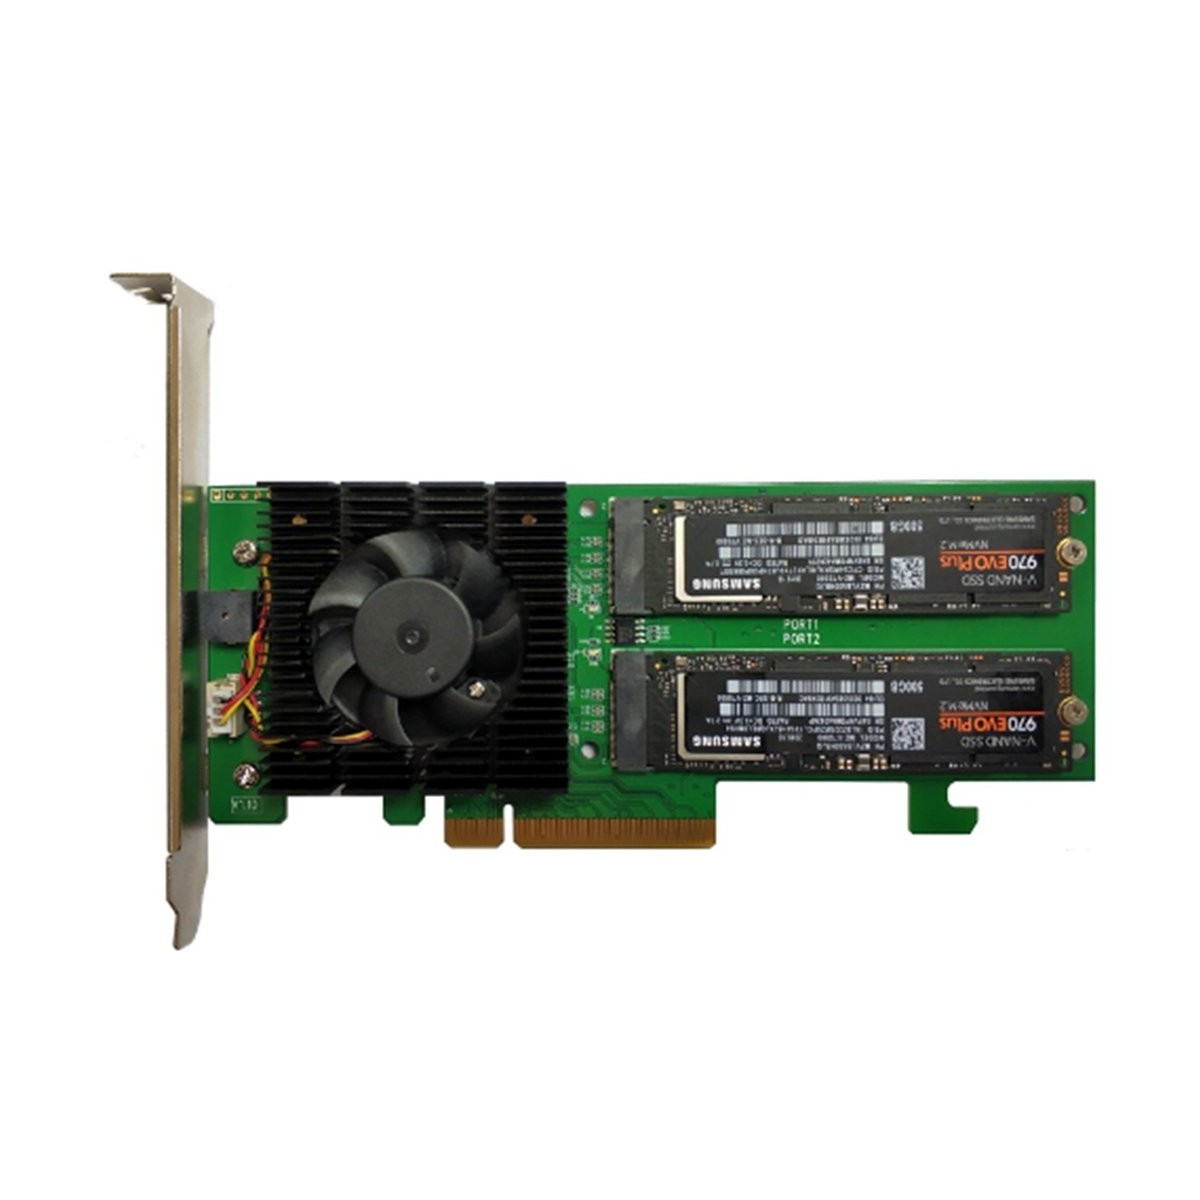 HighPoint SSD7202 - PCI Express 3.0 - PCI Express x8 - 8 Gbit/s - Low-Profile MD2 PCIe AIC - CLI - API package - 2 channels